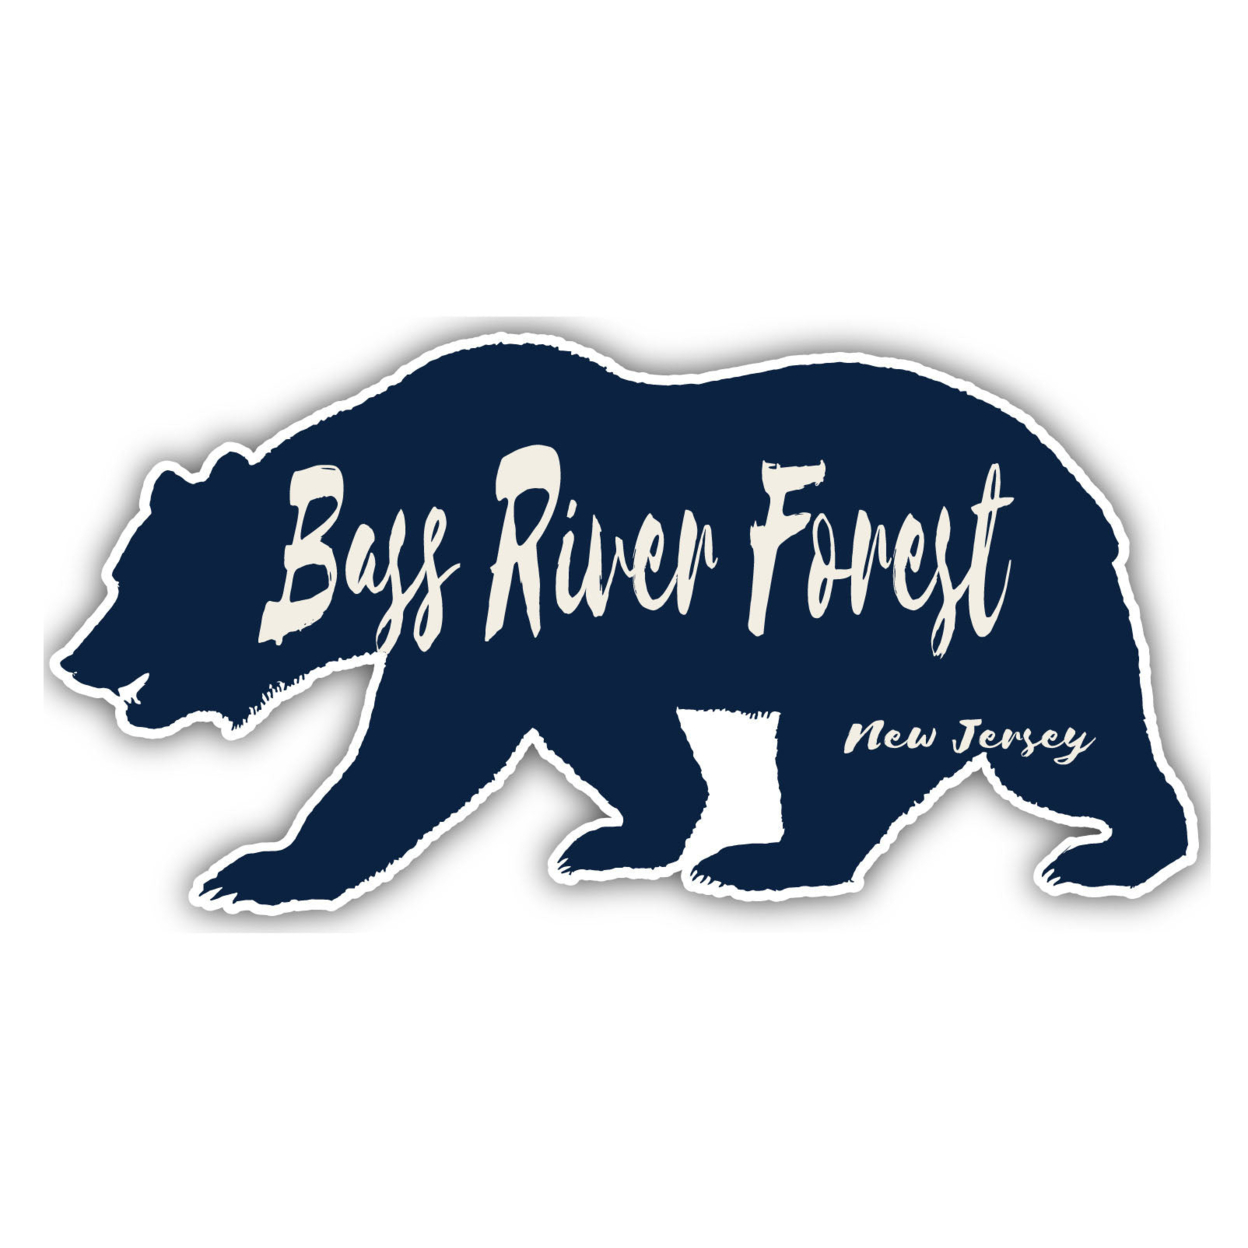 Bass River Forest New Jersey Souvenir Decorative Stickers (Choose Theme And Size) - 4-Pack, 4-Inch, Bear